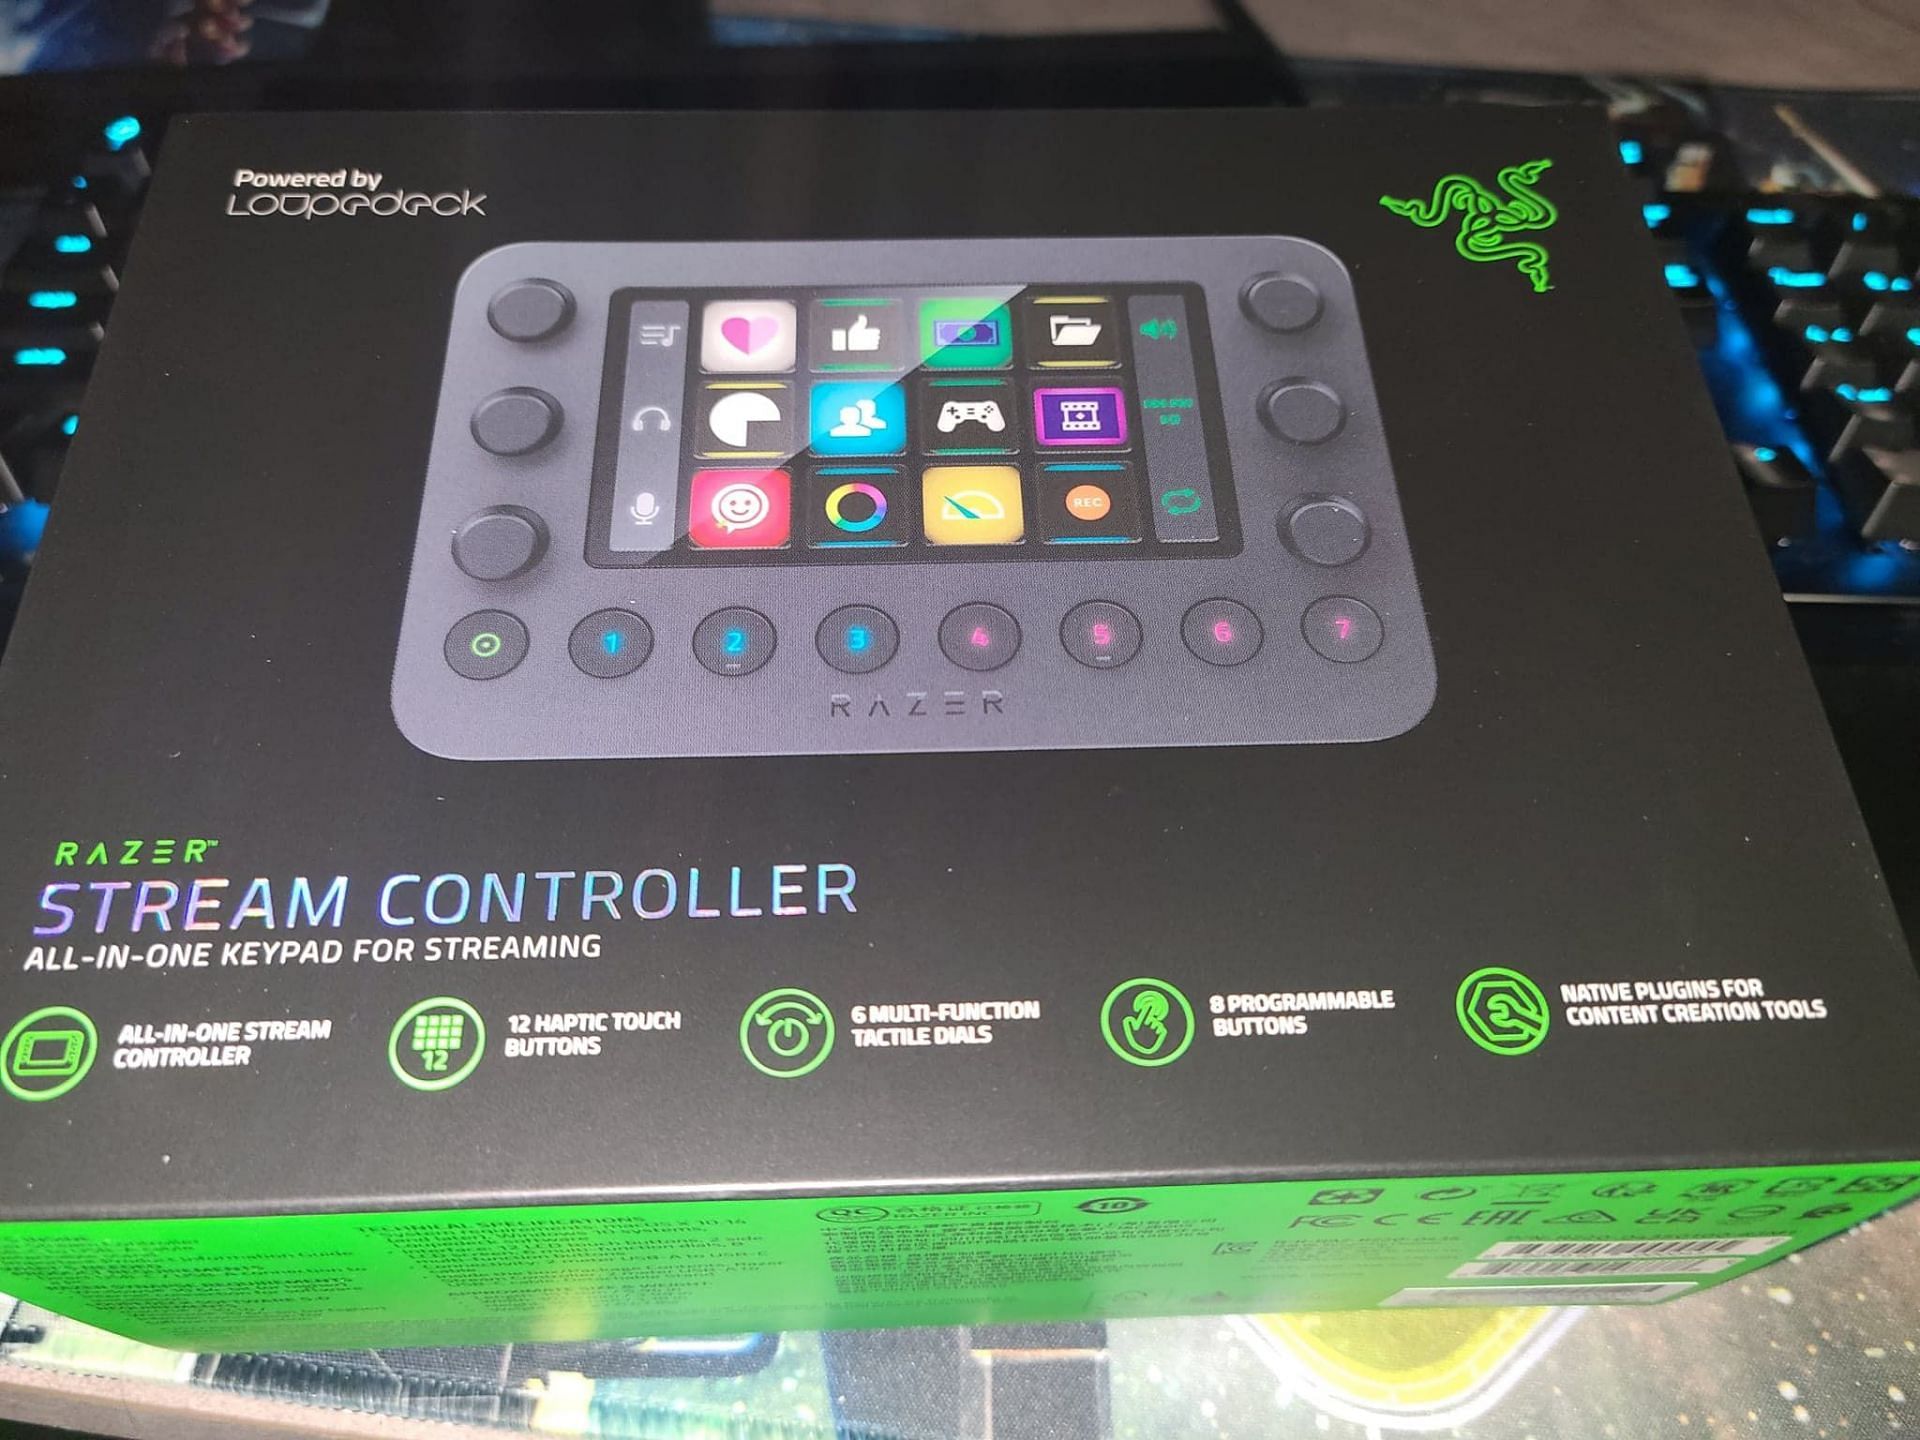 The Razer Stream Controller is expensive but offers incredible control over your stream and PC (Image via Razer)